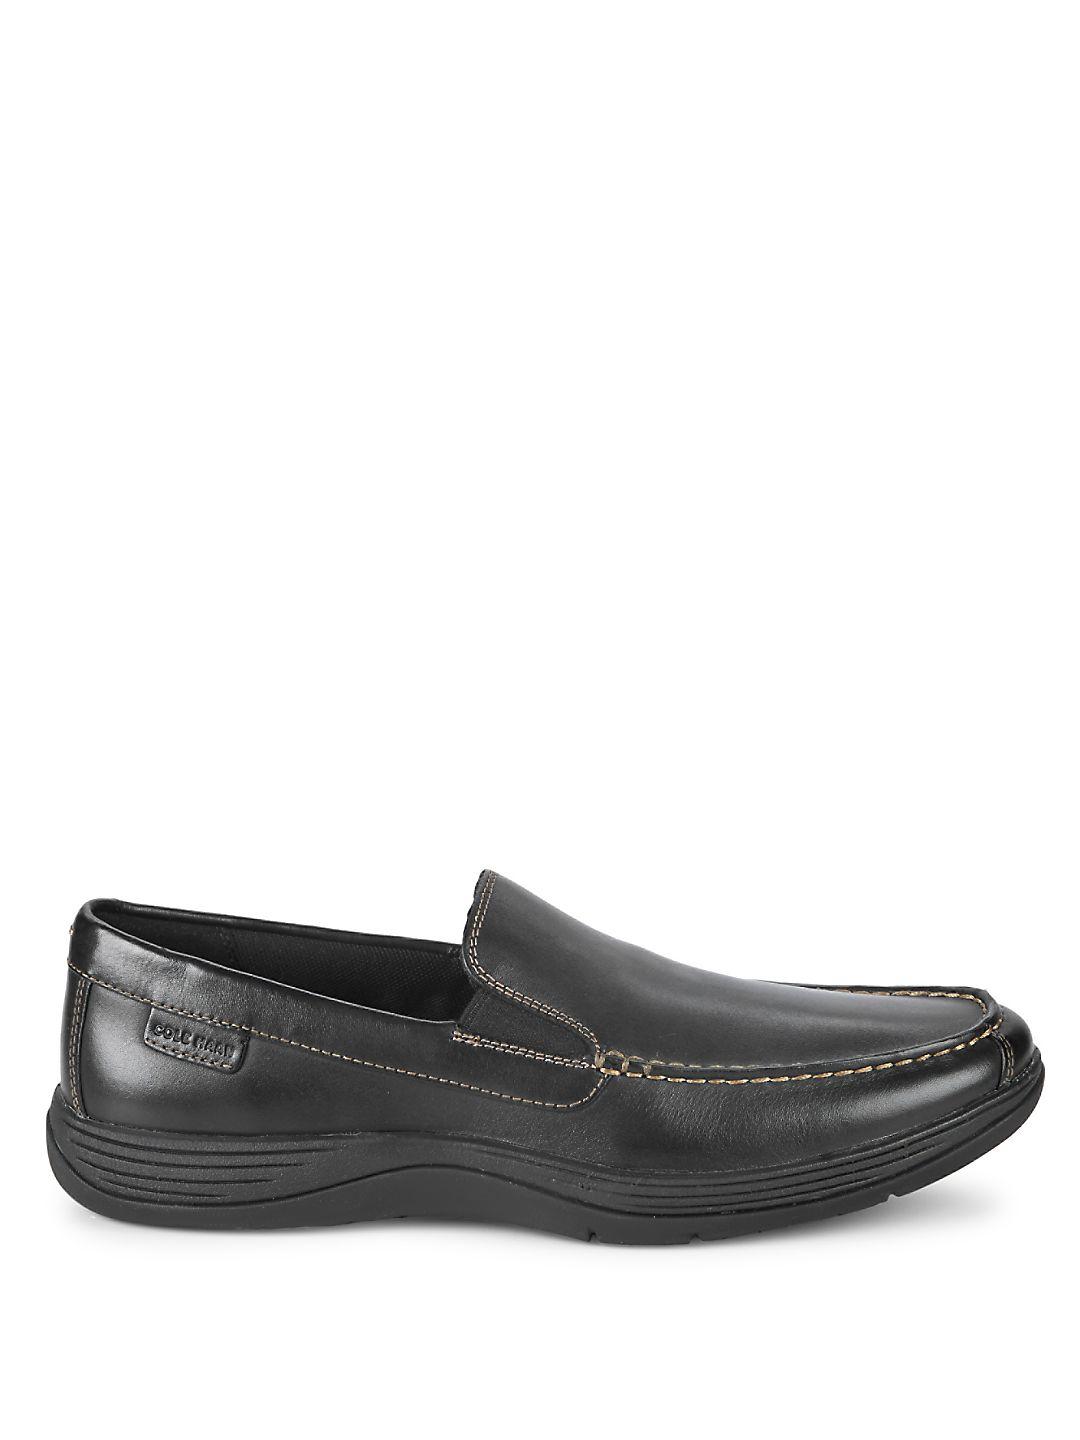 Cole Haan Lewiston Venetian Leather Loafers in Black for Men - Lyst